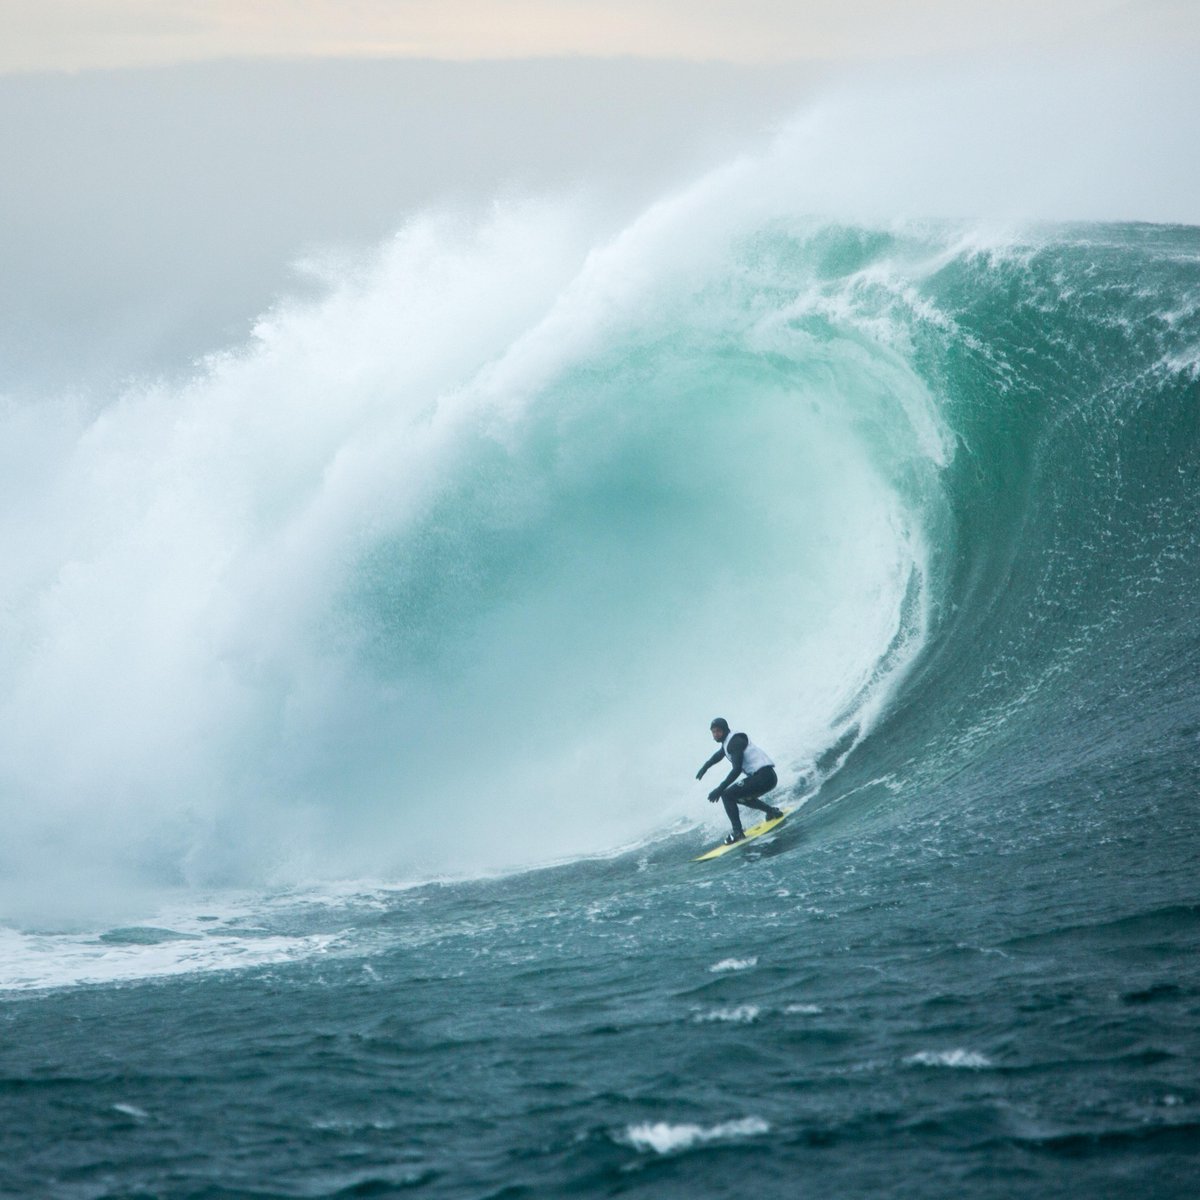 Some of the biggest waves in the world could be at #SurfSummit 2015. Snapped this beast Mullaghmore #AdventureCapital